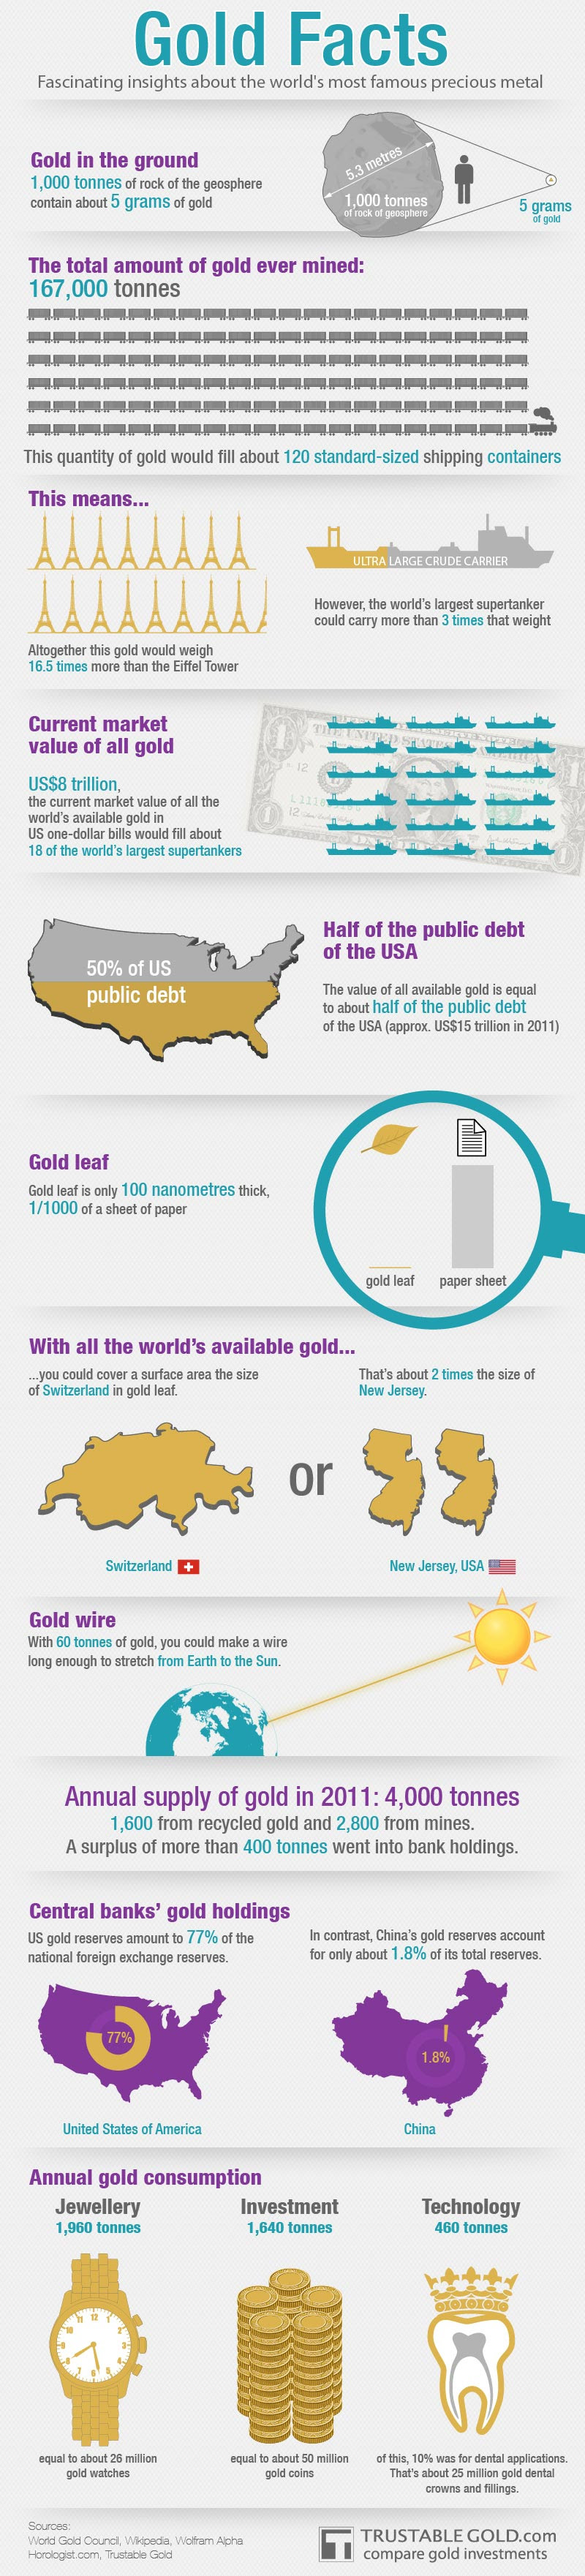 Infographic Gold Facts